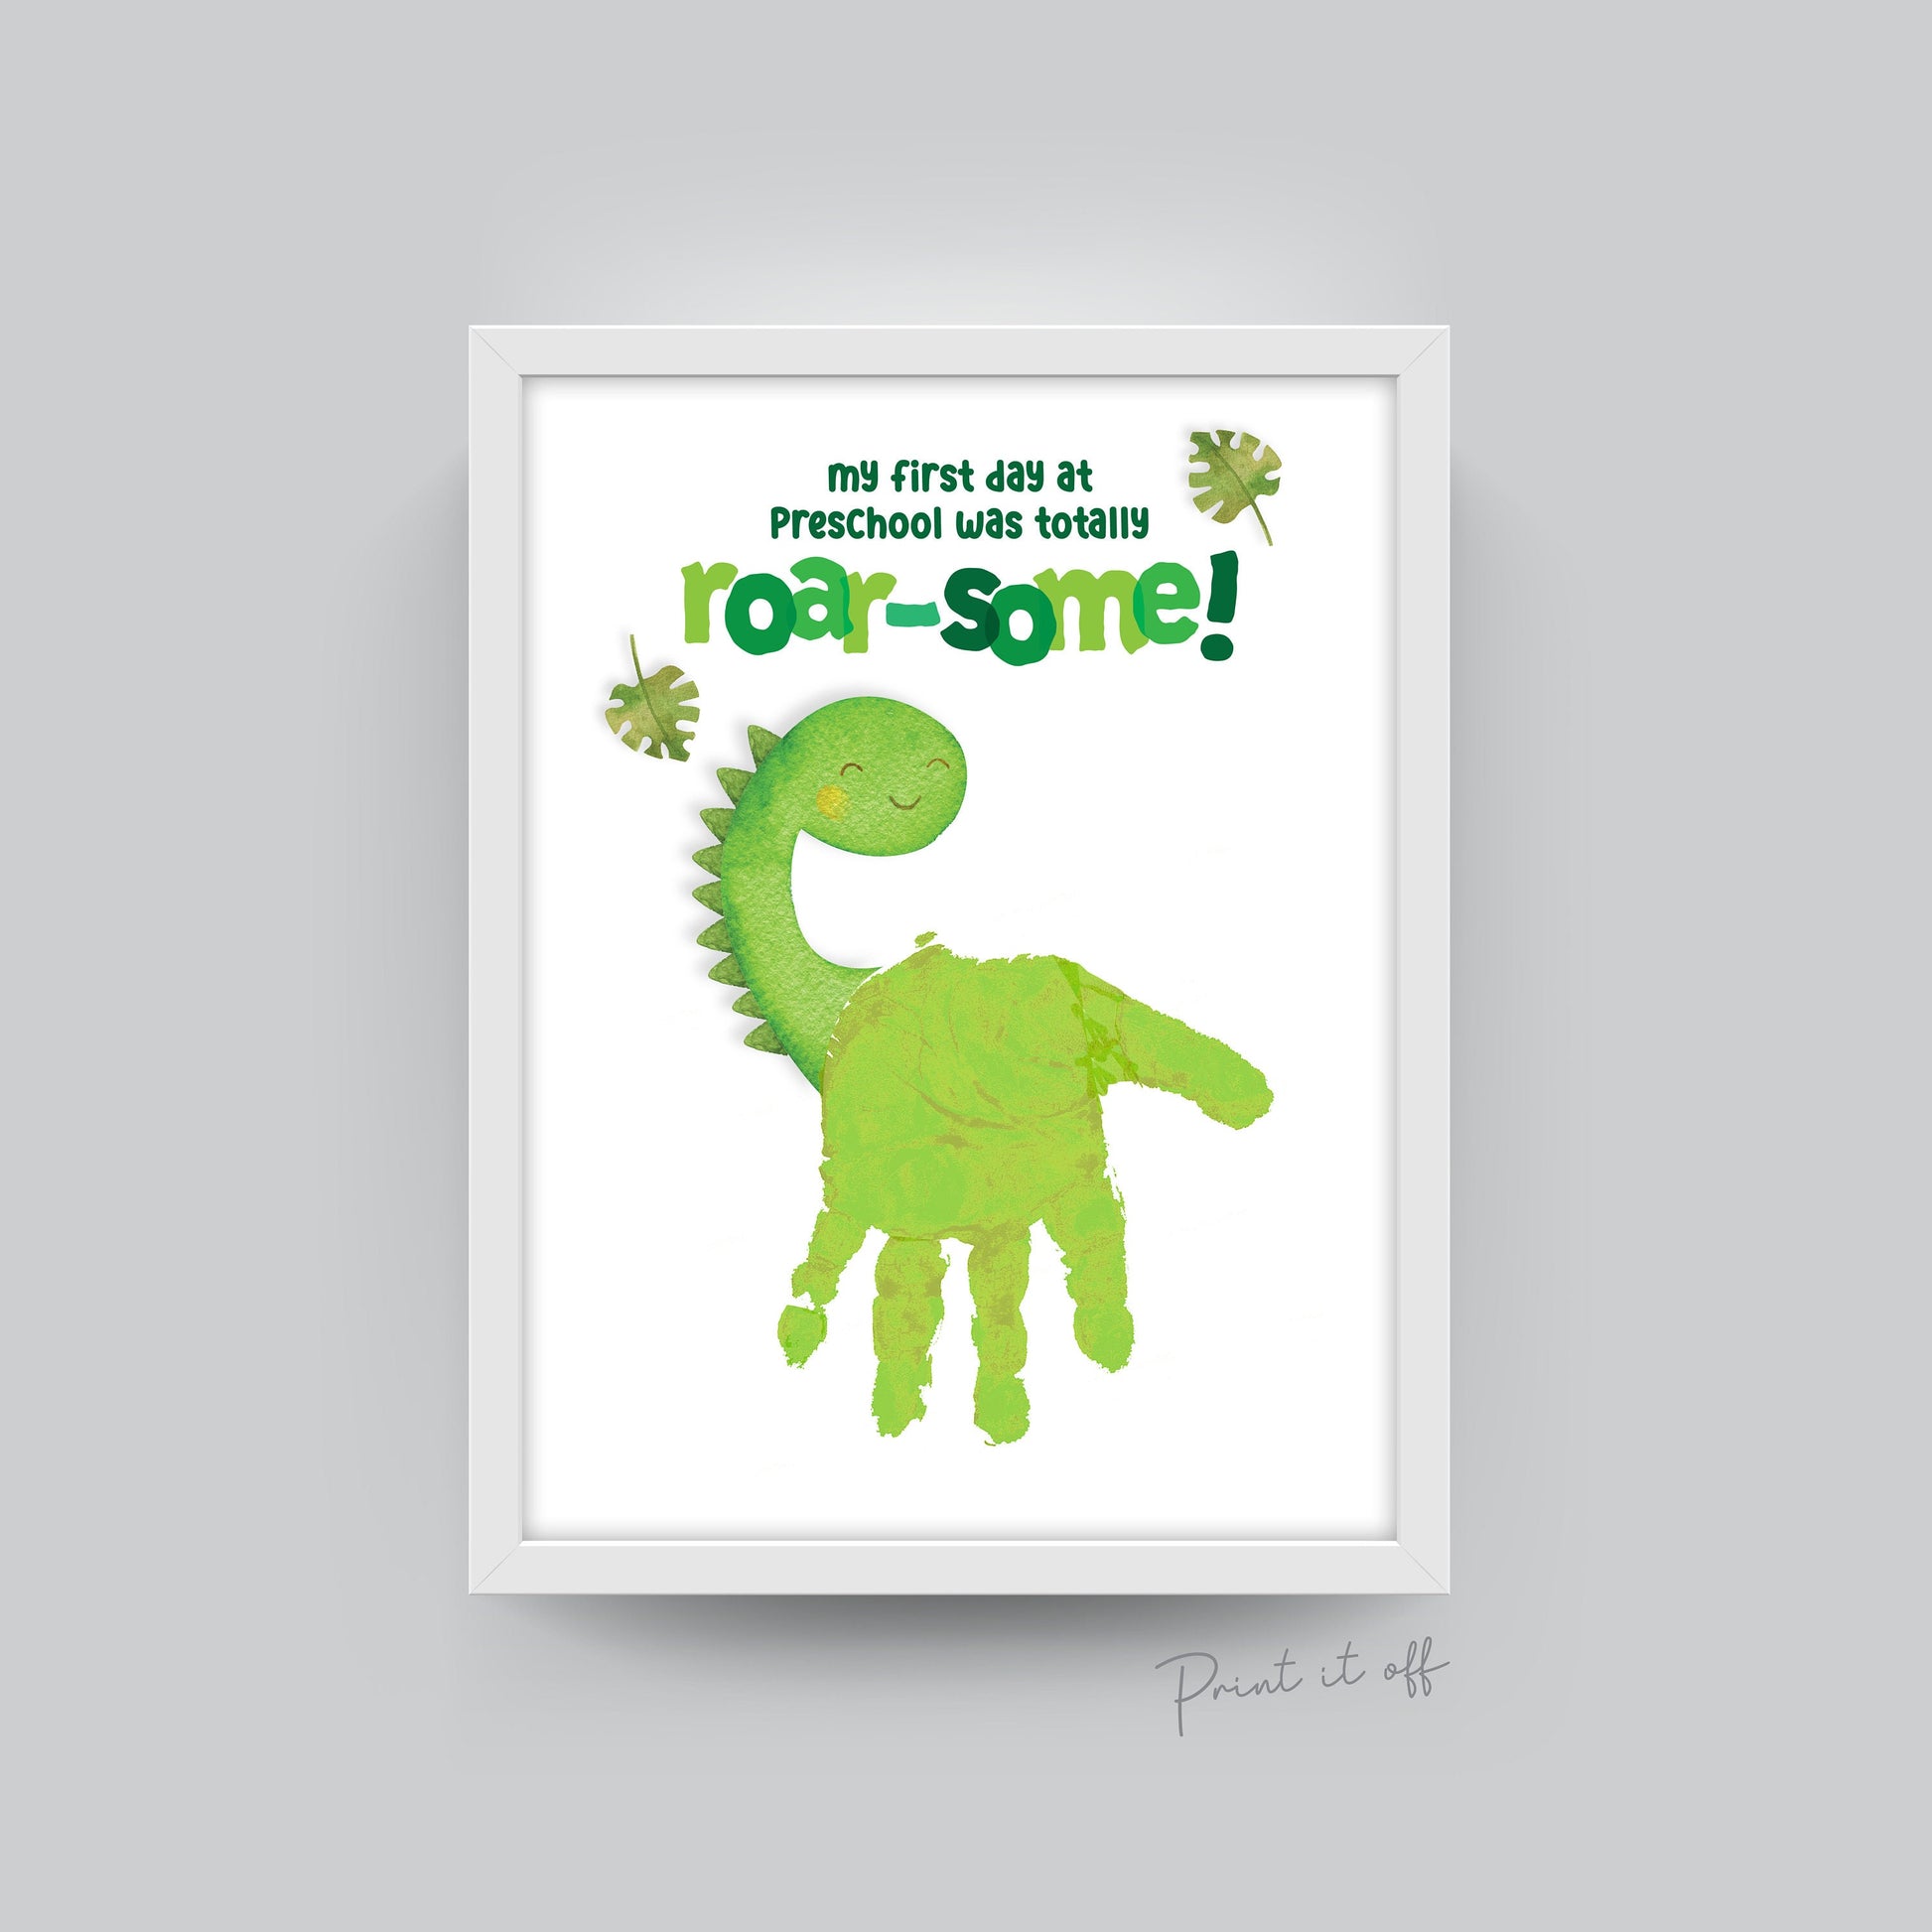 Handprint Art / Dad You Are Totally Roarsome / Kids Handprint